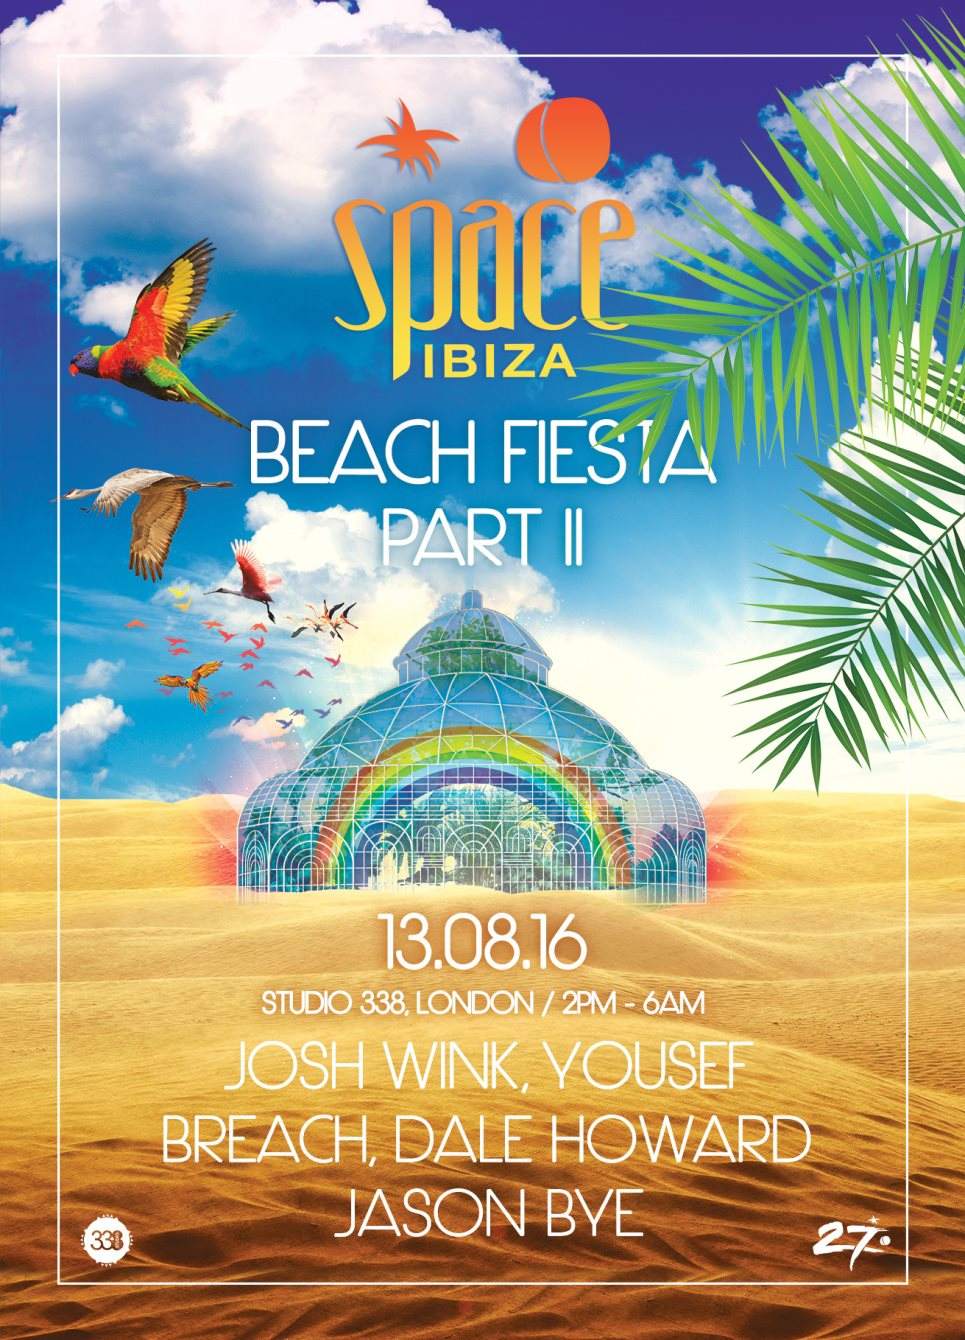 Space Ibiza: Beach Fiesta (Part 2) with Josh Wink, Yousef, Breach, Dale Howard & More - Página frontal